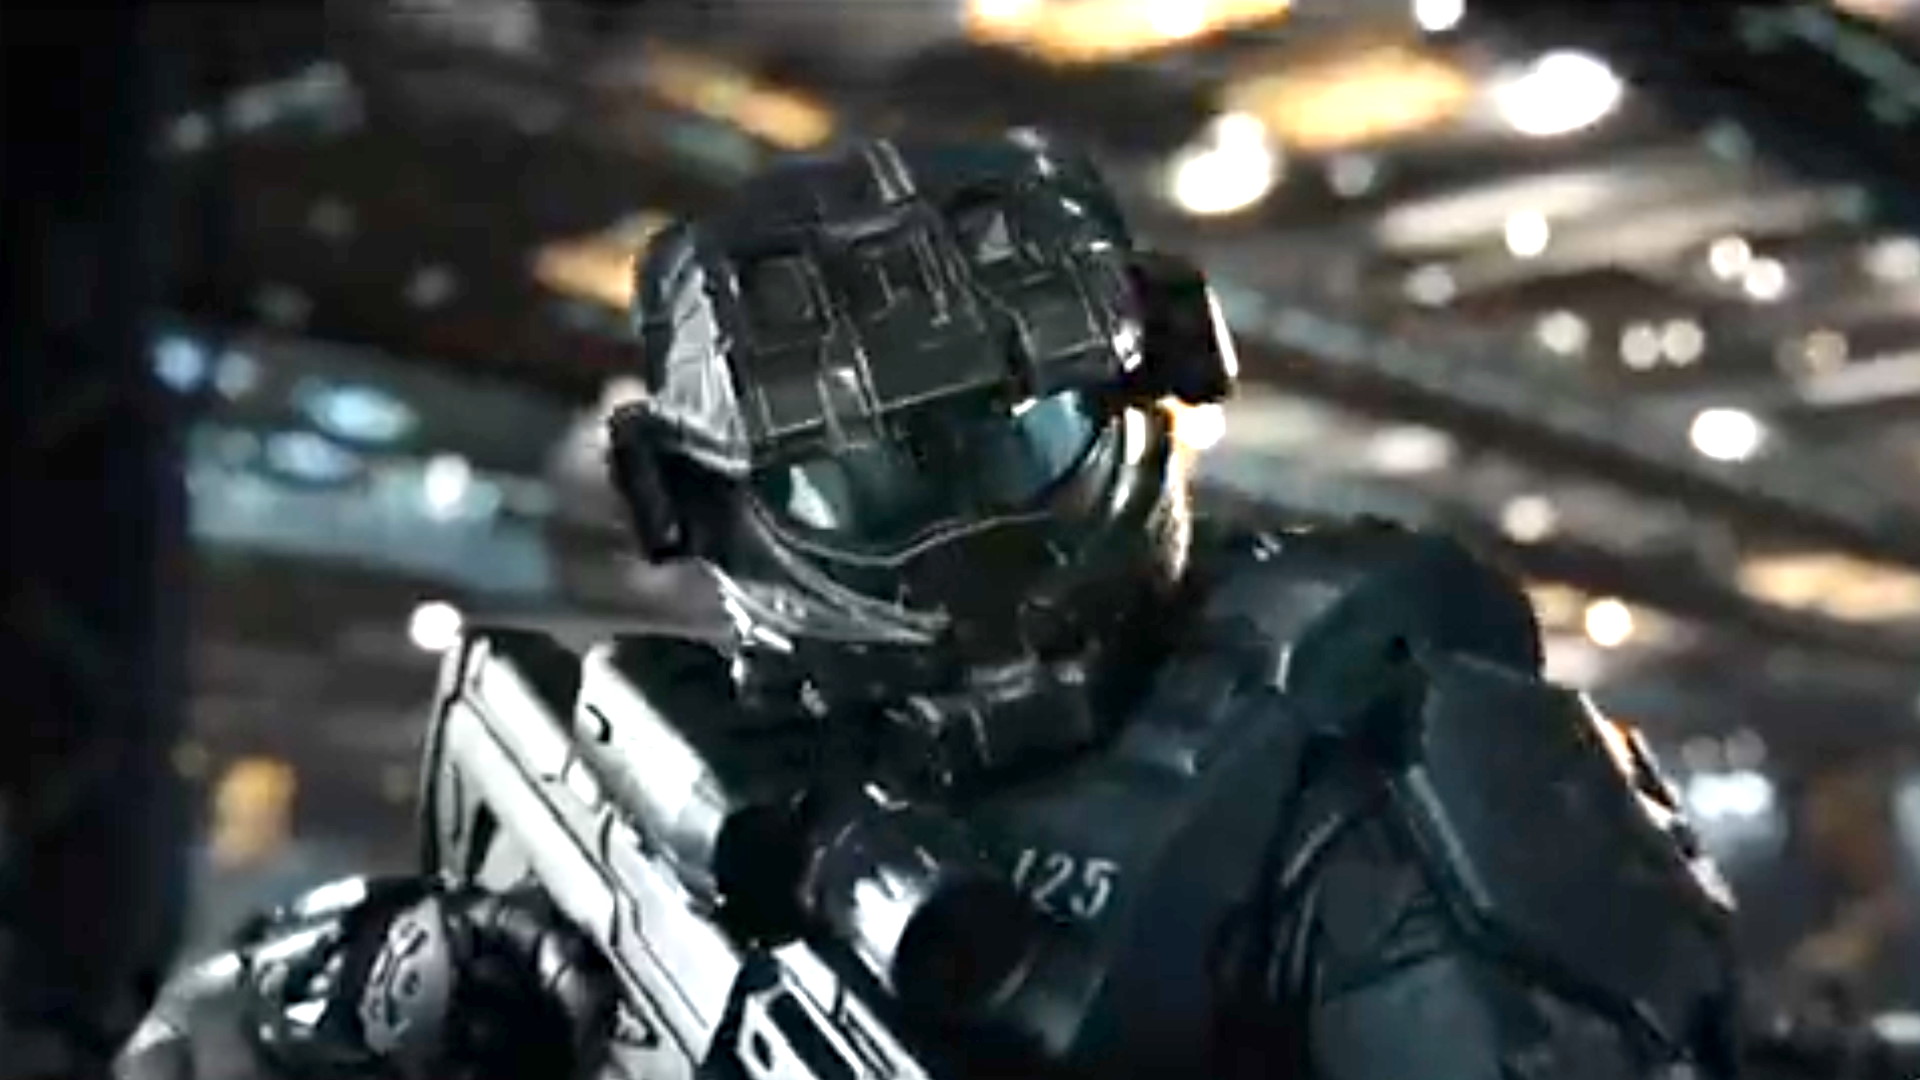 Paramount+ Reveals 'Halo' Official Trailer and Release Date